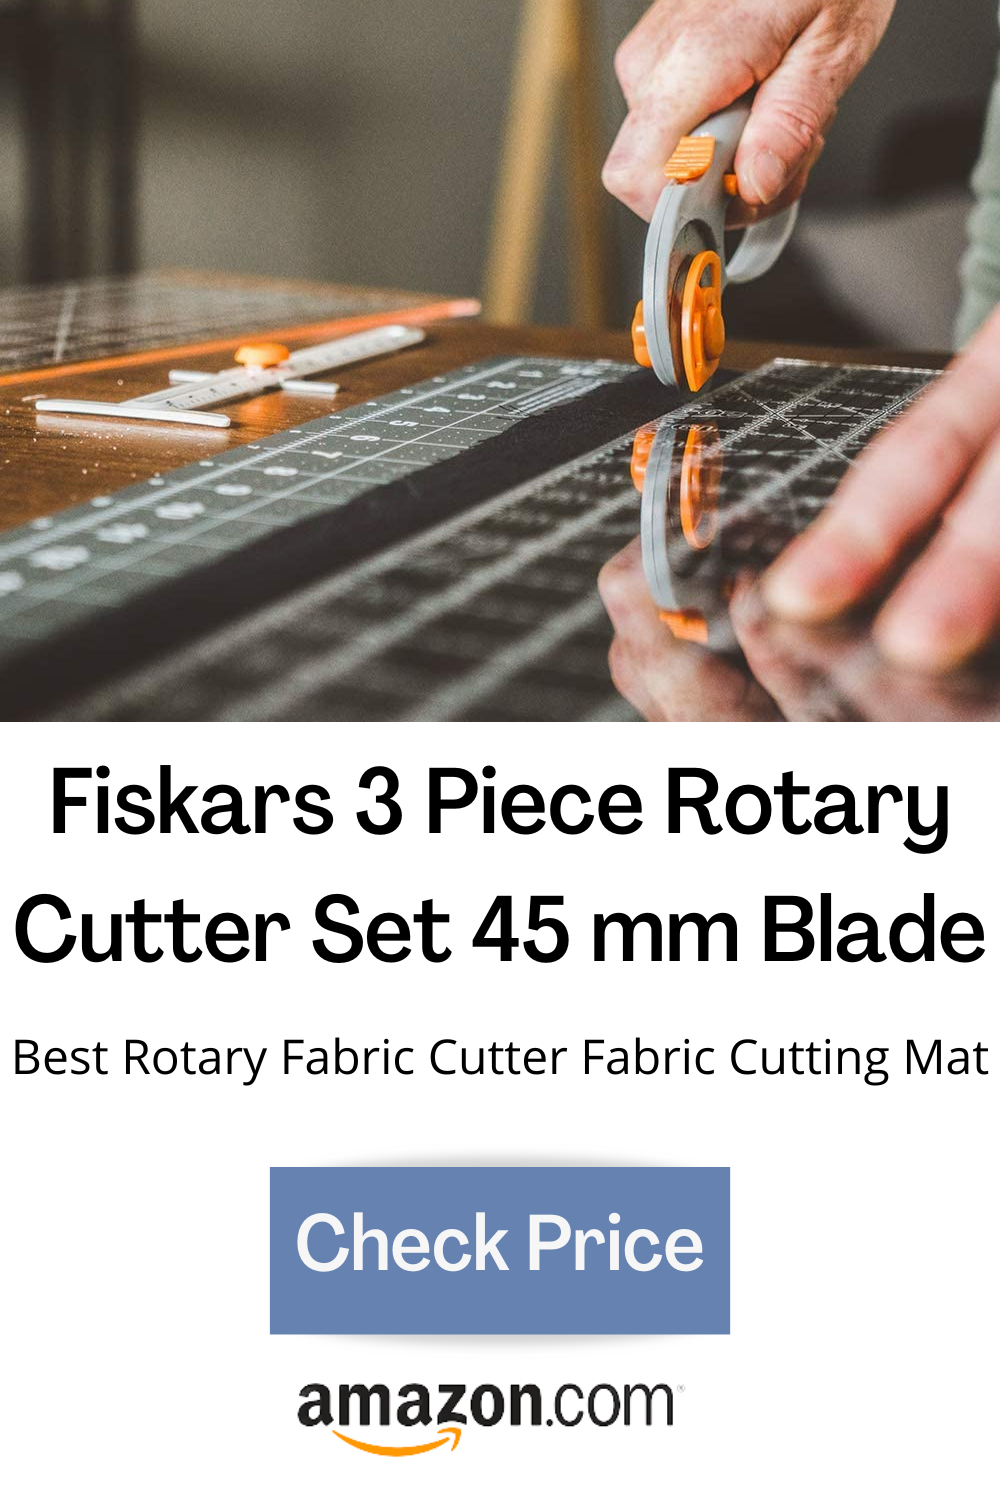 Rotary Cutter Cutting Fabric, Best Rotary Cutter Quilting